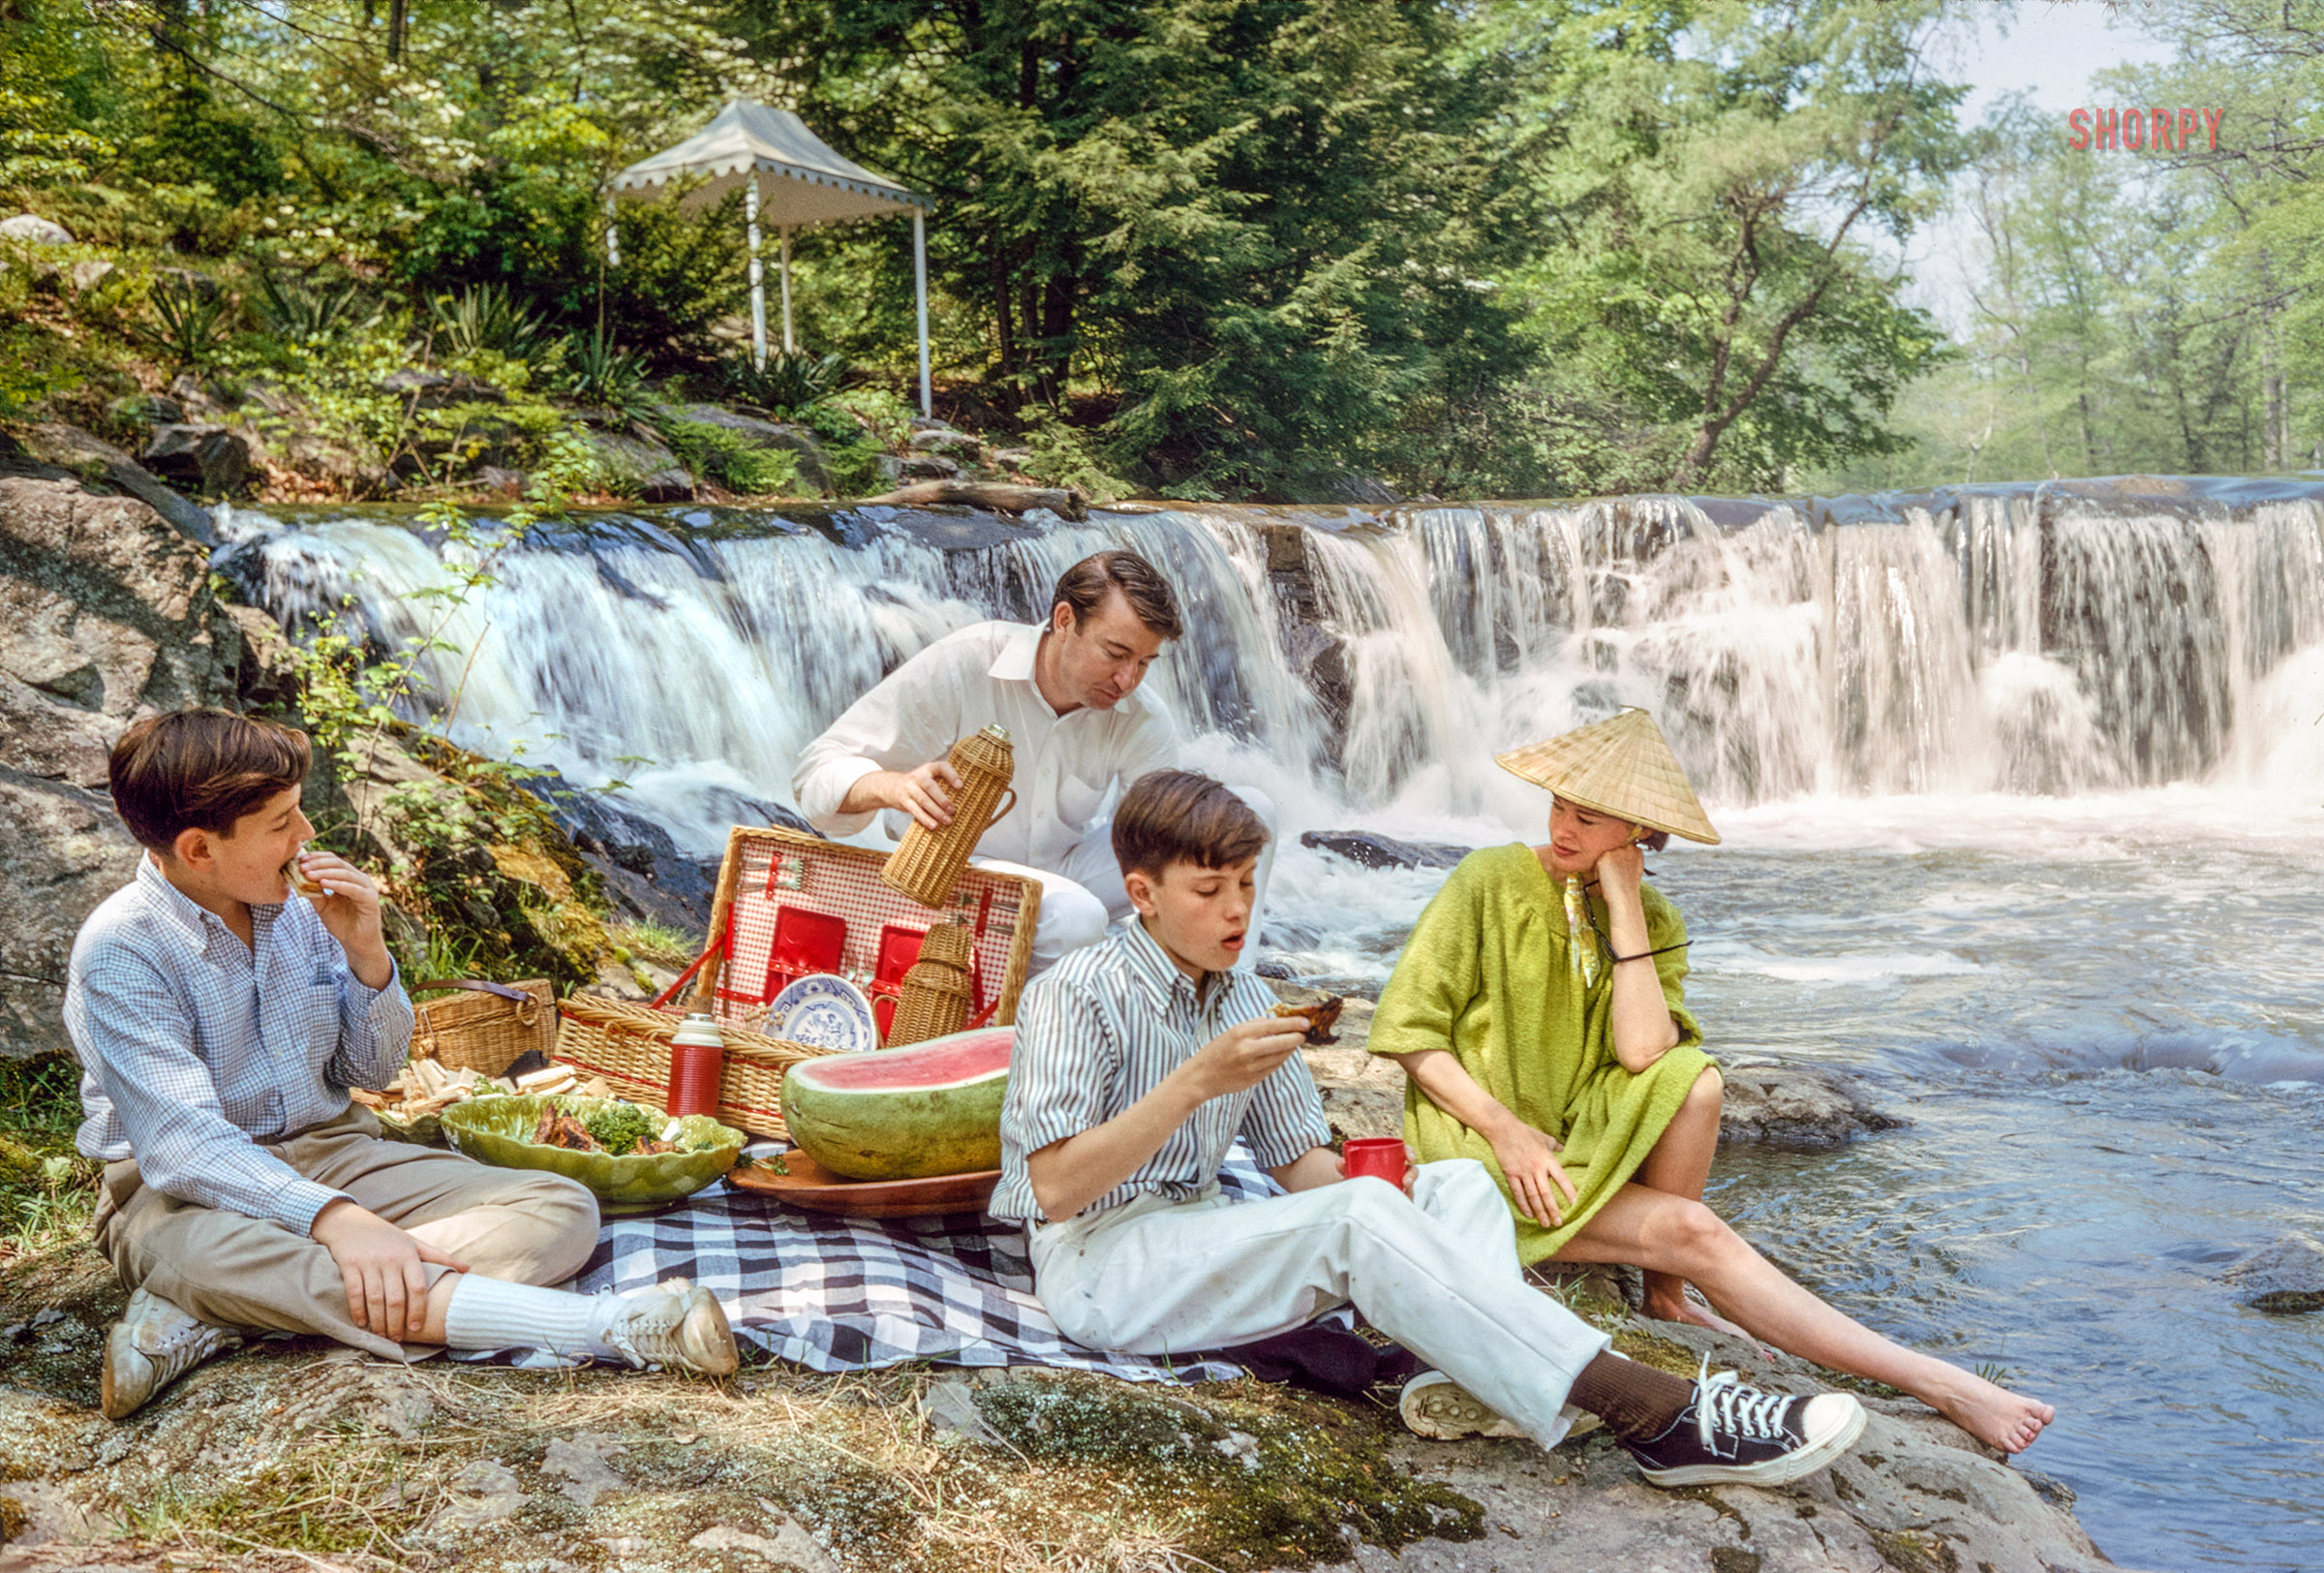 May 1964. 35mm Kodachrome by Toni Frissell for the Life magazine assignment "The Splendor of a Great Family: The Vanderbilts." View full size.
&nbsp; &nbsp; &nbsp; &nbsp; On her country estate near Stamford, Connecticut, Gloria Vanderbilt enjoys a picnic with her husband, Wyatt Cooper, and two sons by her marriage to Leopold Stokowski -- Chris, 12, and Stan, 13. She came upon the picturesque waterfall with its secluded cottage one day and couldn't resist buying it. "It was like something out of a fairy tale," she exclaims.